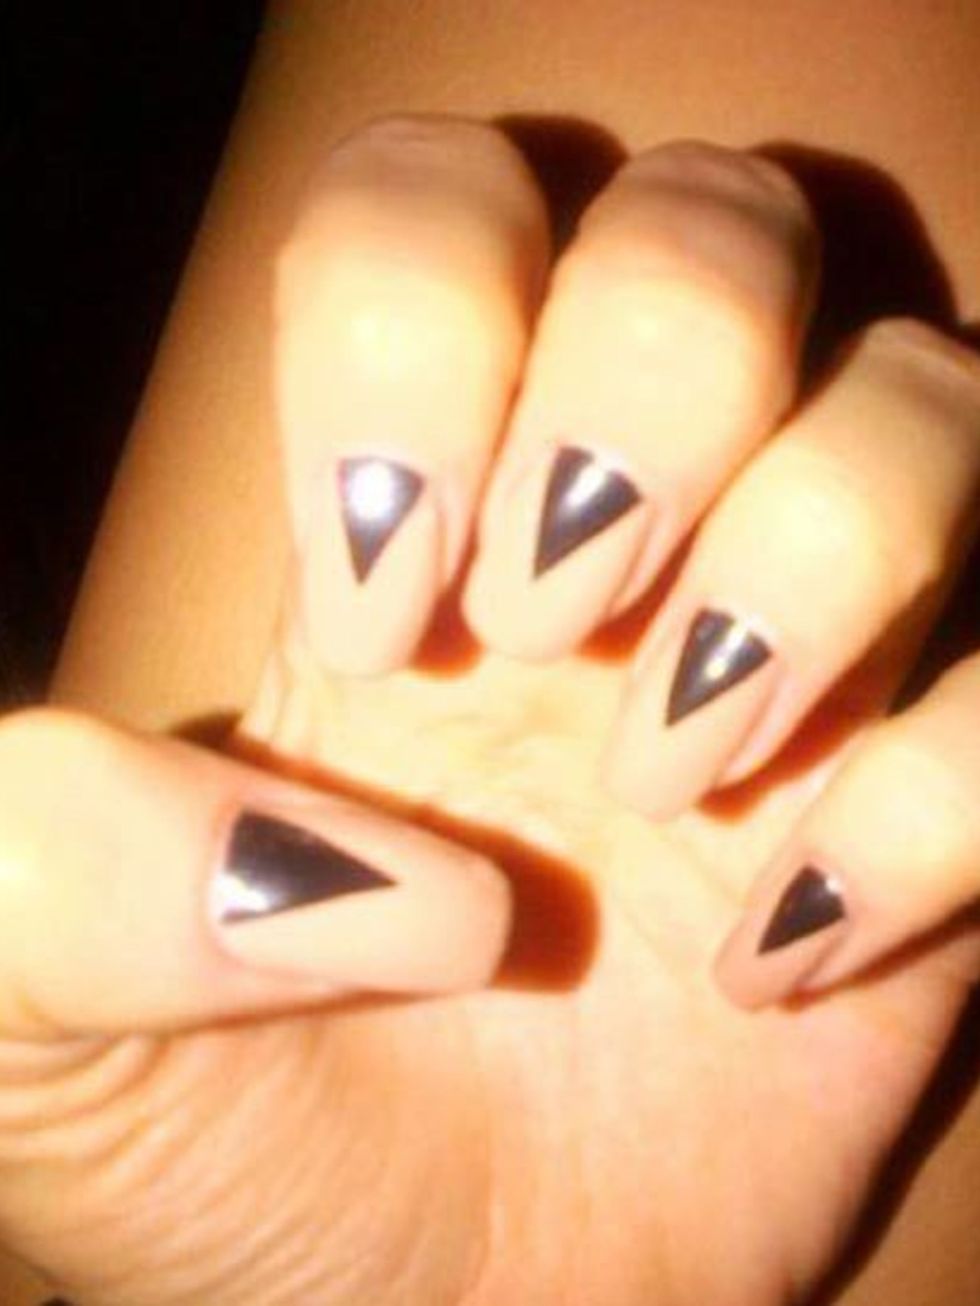 <p>The first in a three-part series we are going to be showing you step-by-step how to recreate three of Jessie J's most fabulous nail art looks starting with <em>The Graphic Moon</em>.</p><p>When Jessie J tweeted this picture of her nail art we just had 